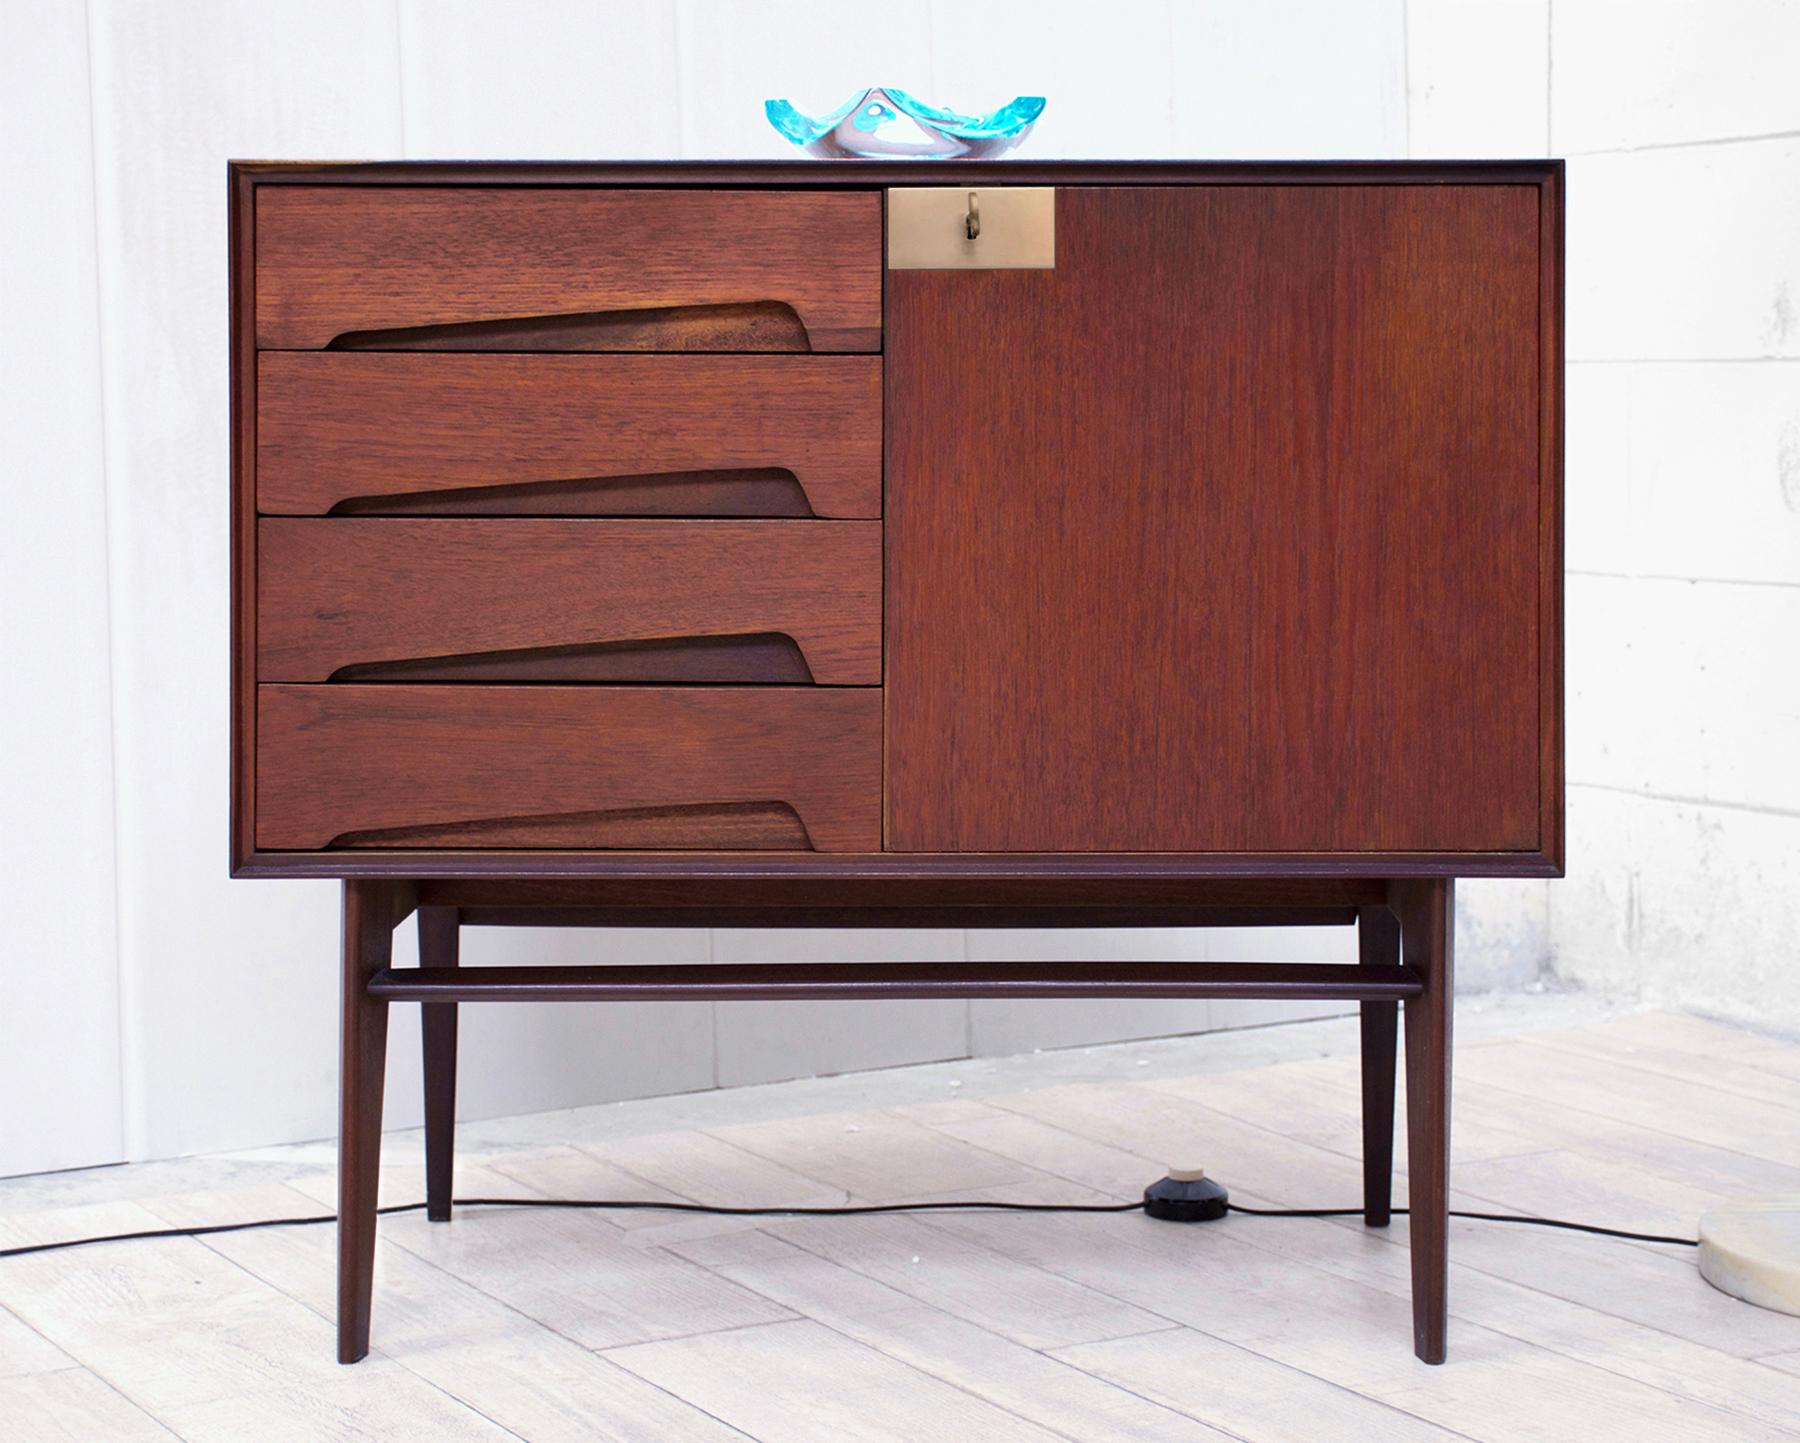 This amazing small sideboard is original of the 1950s, its structure is made in gorgeous material like warm teak wood veneered, equipped with four drawers on the left side and openable door on the right side, finished with brass detail.

It’s in